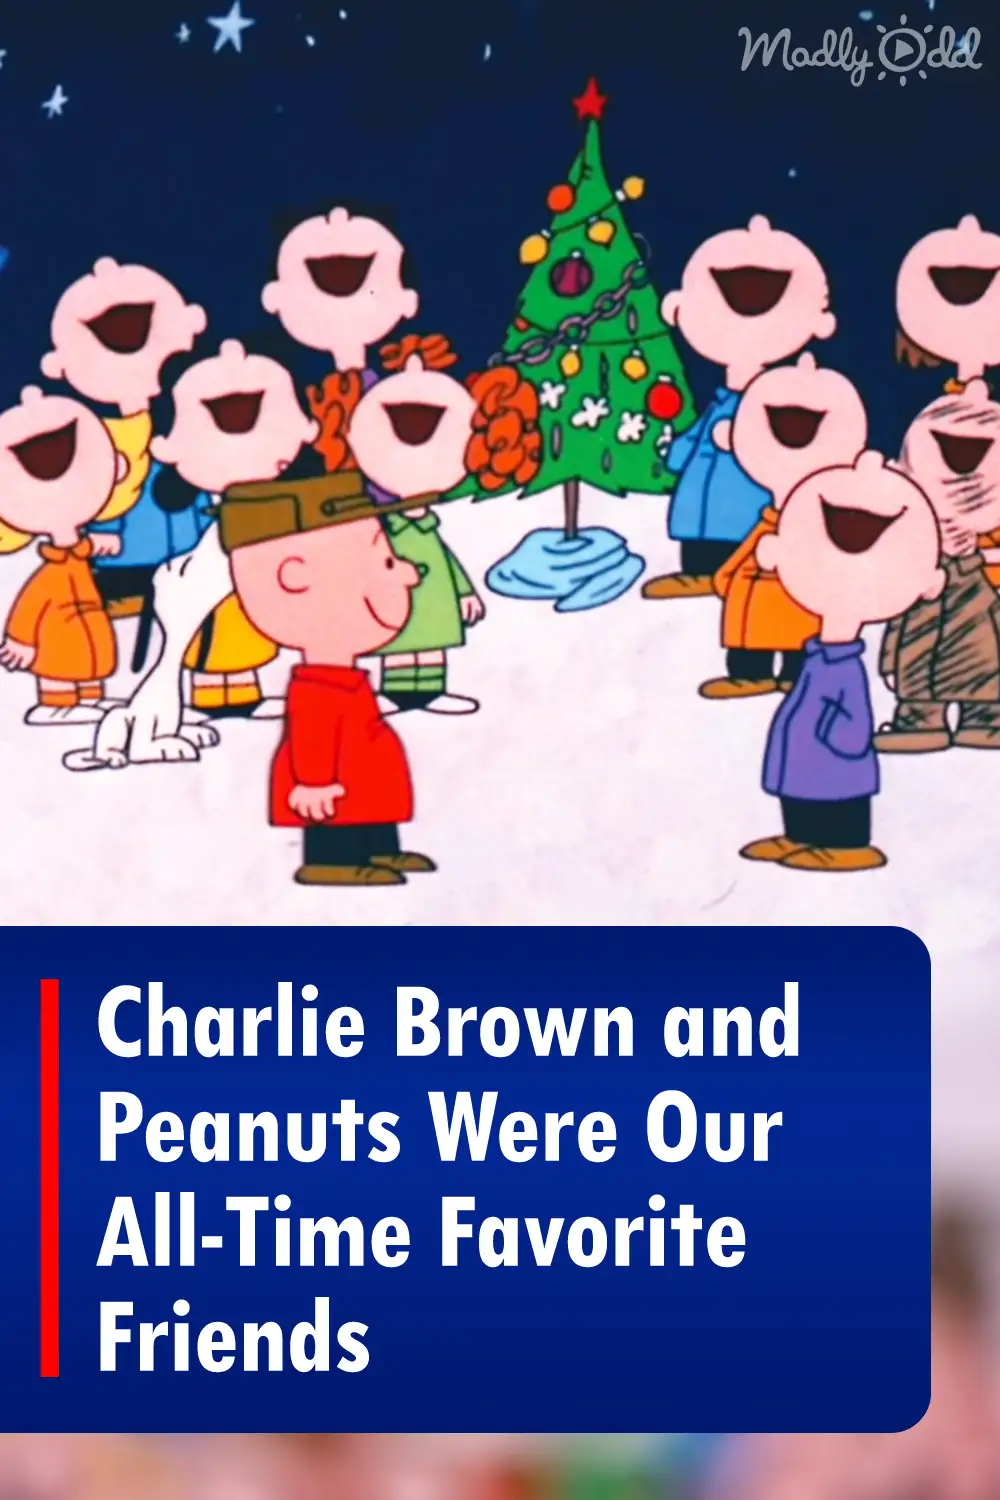 Charlie Brown and Peanuts Were Our All-Time Favorite Friends